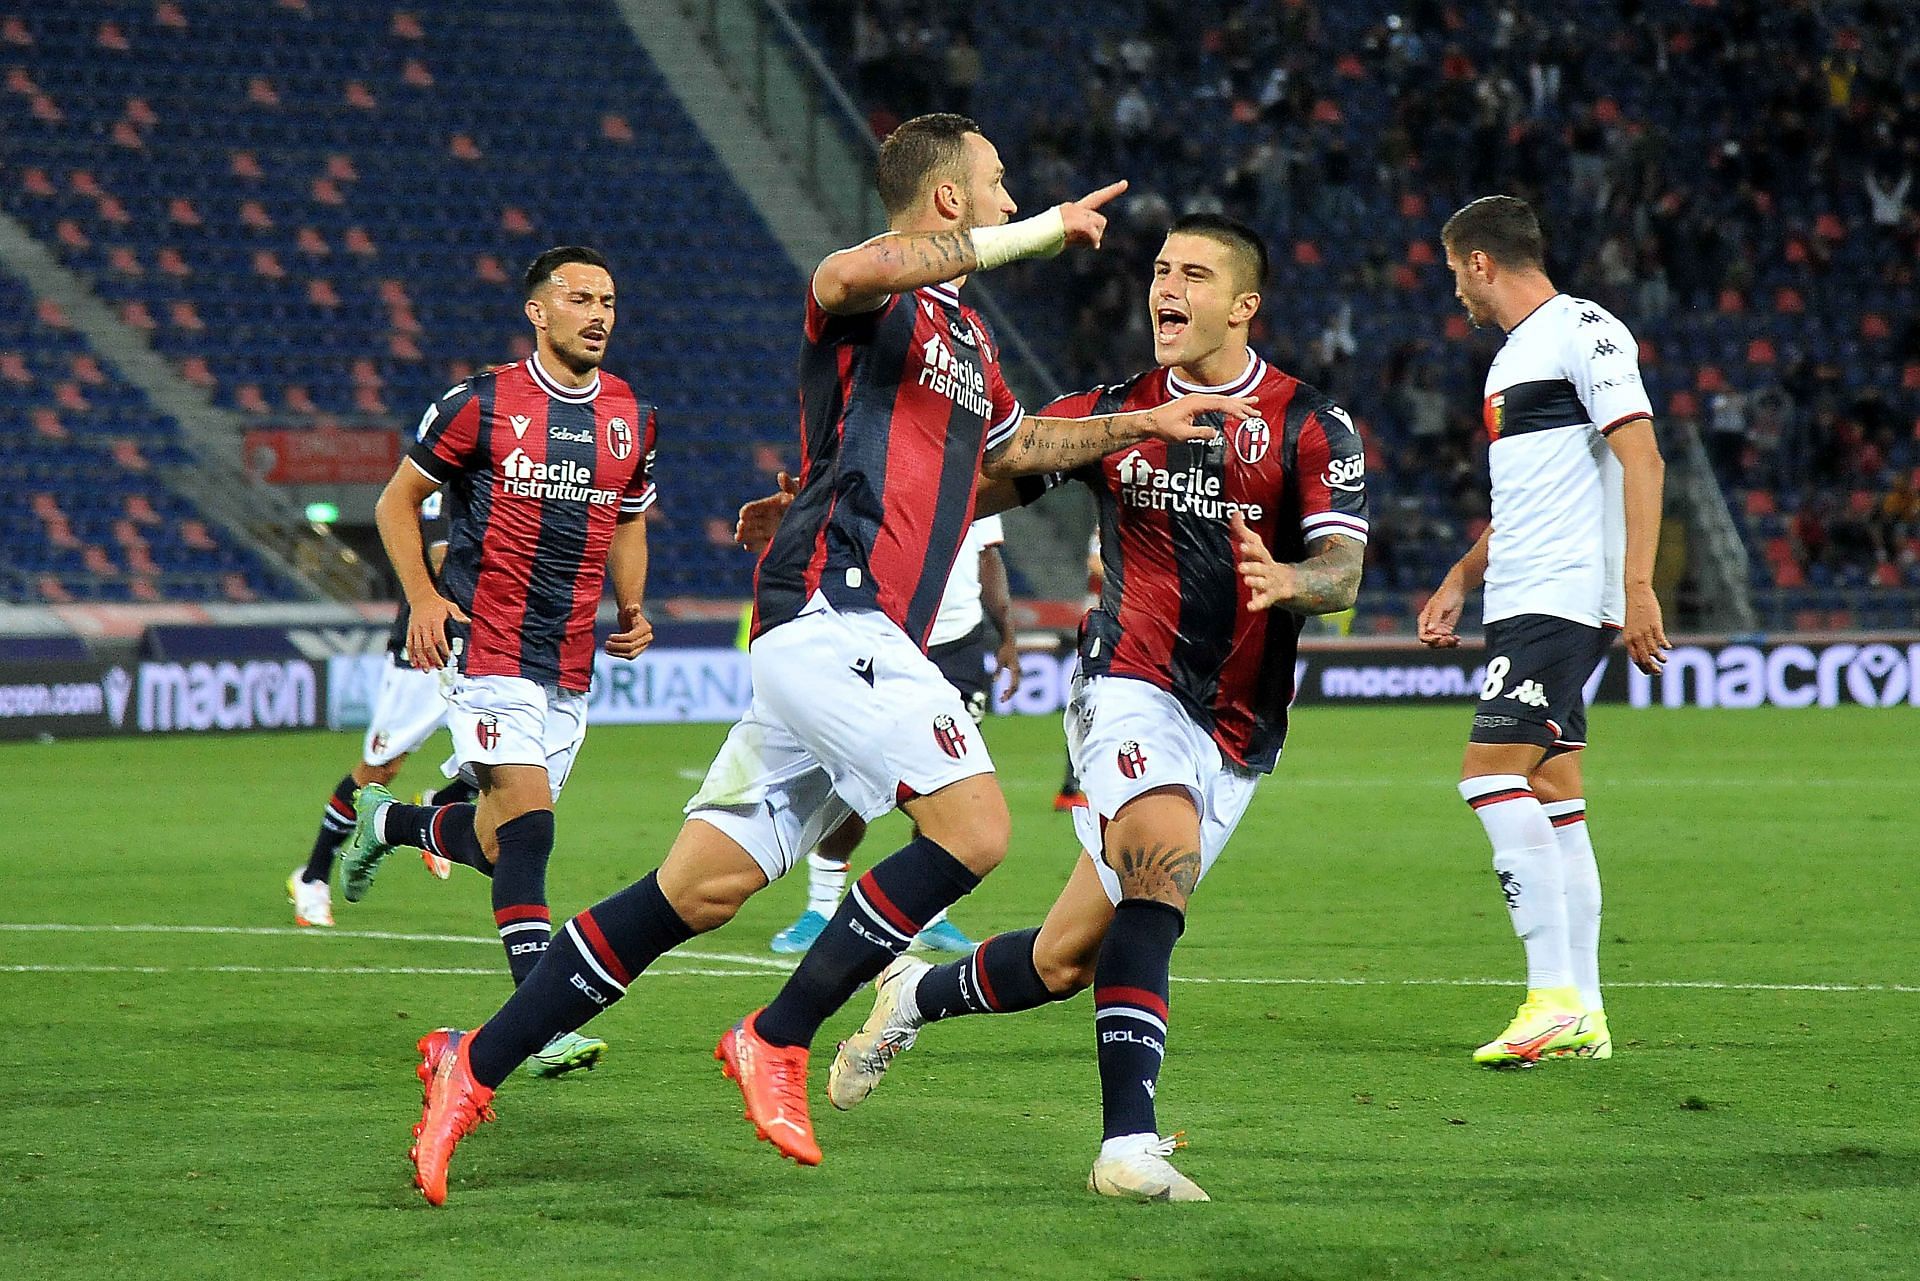 Genoa host Bologna in their final Serie A game on Saturday